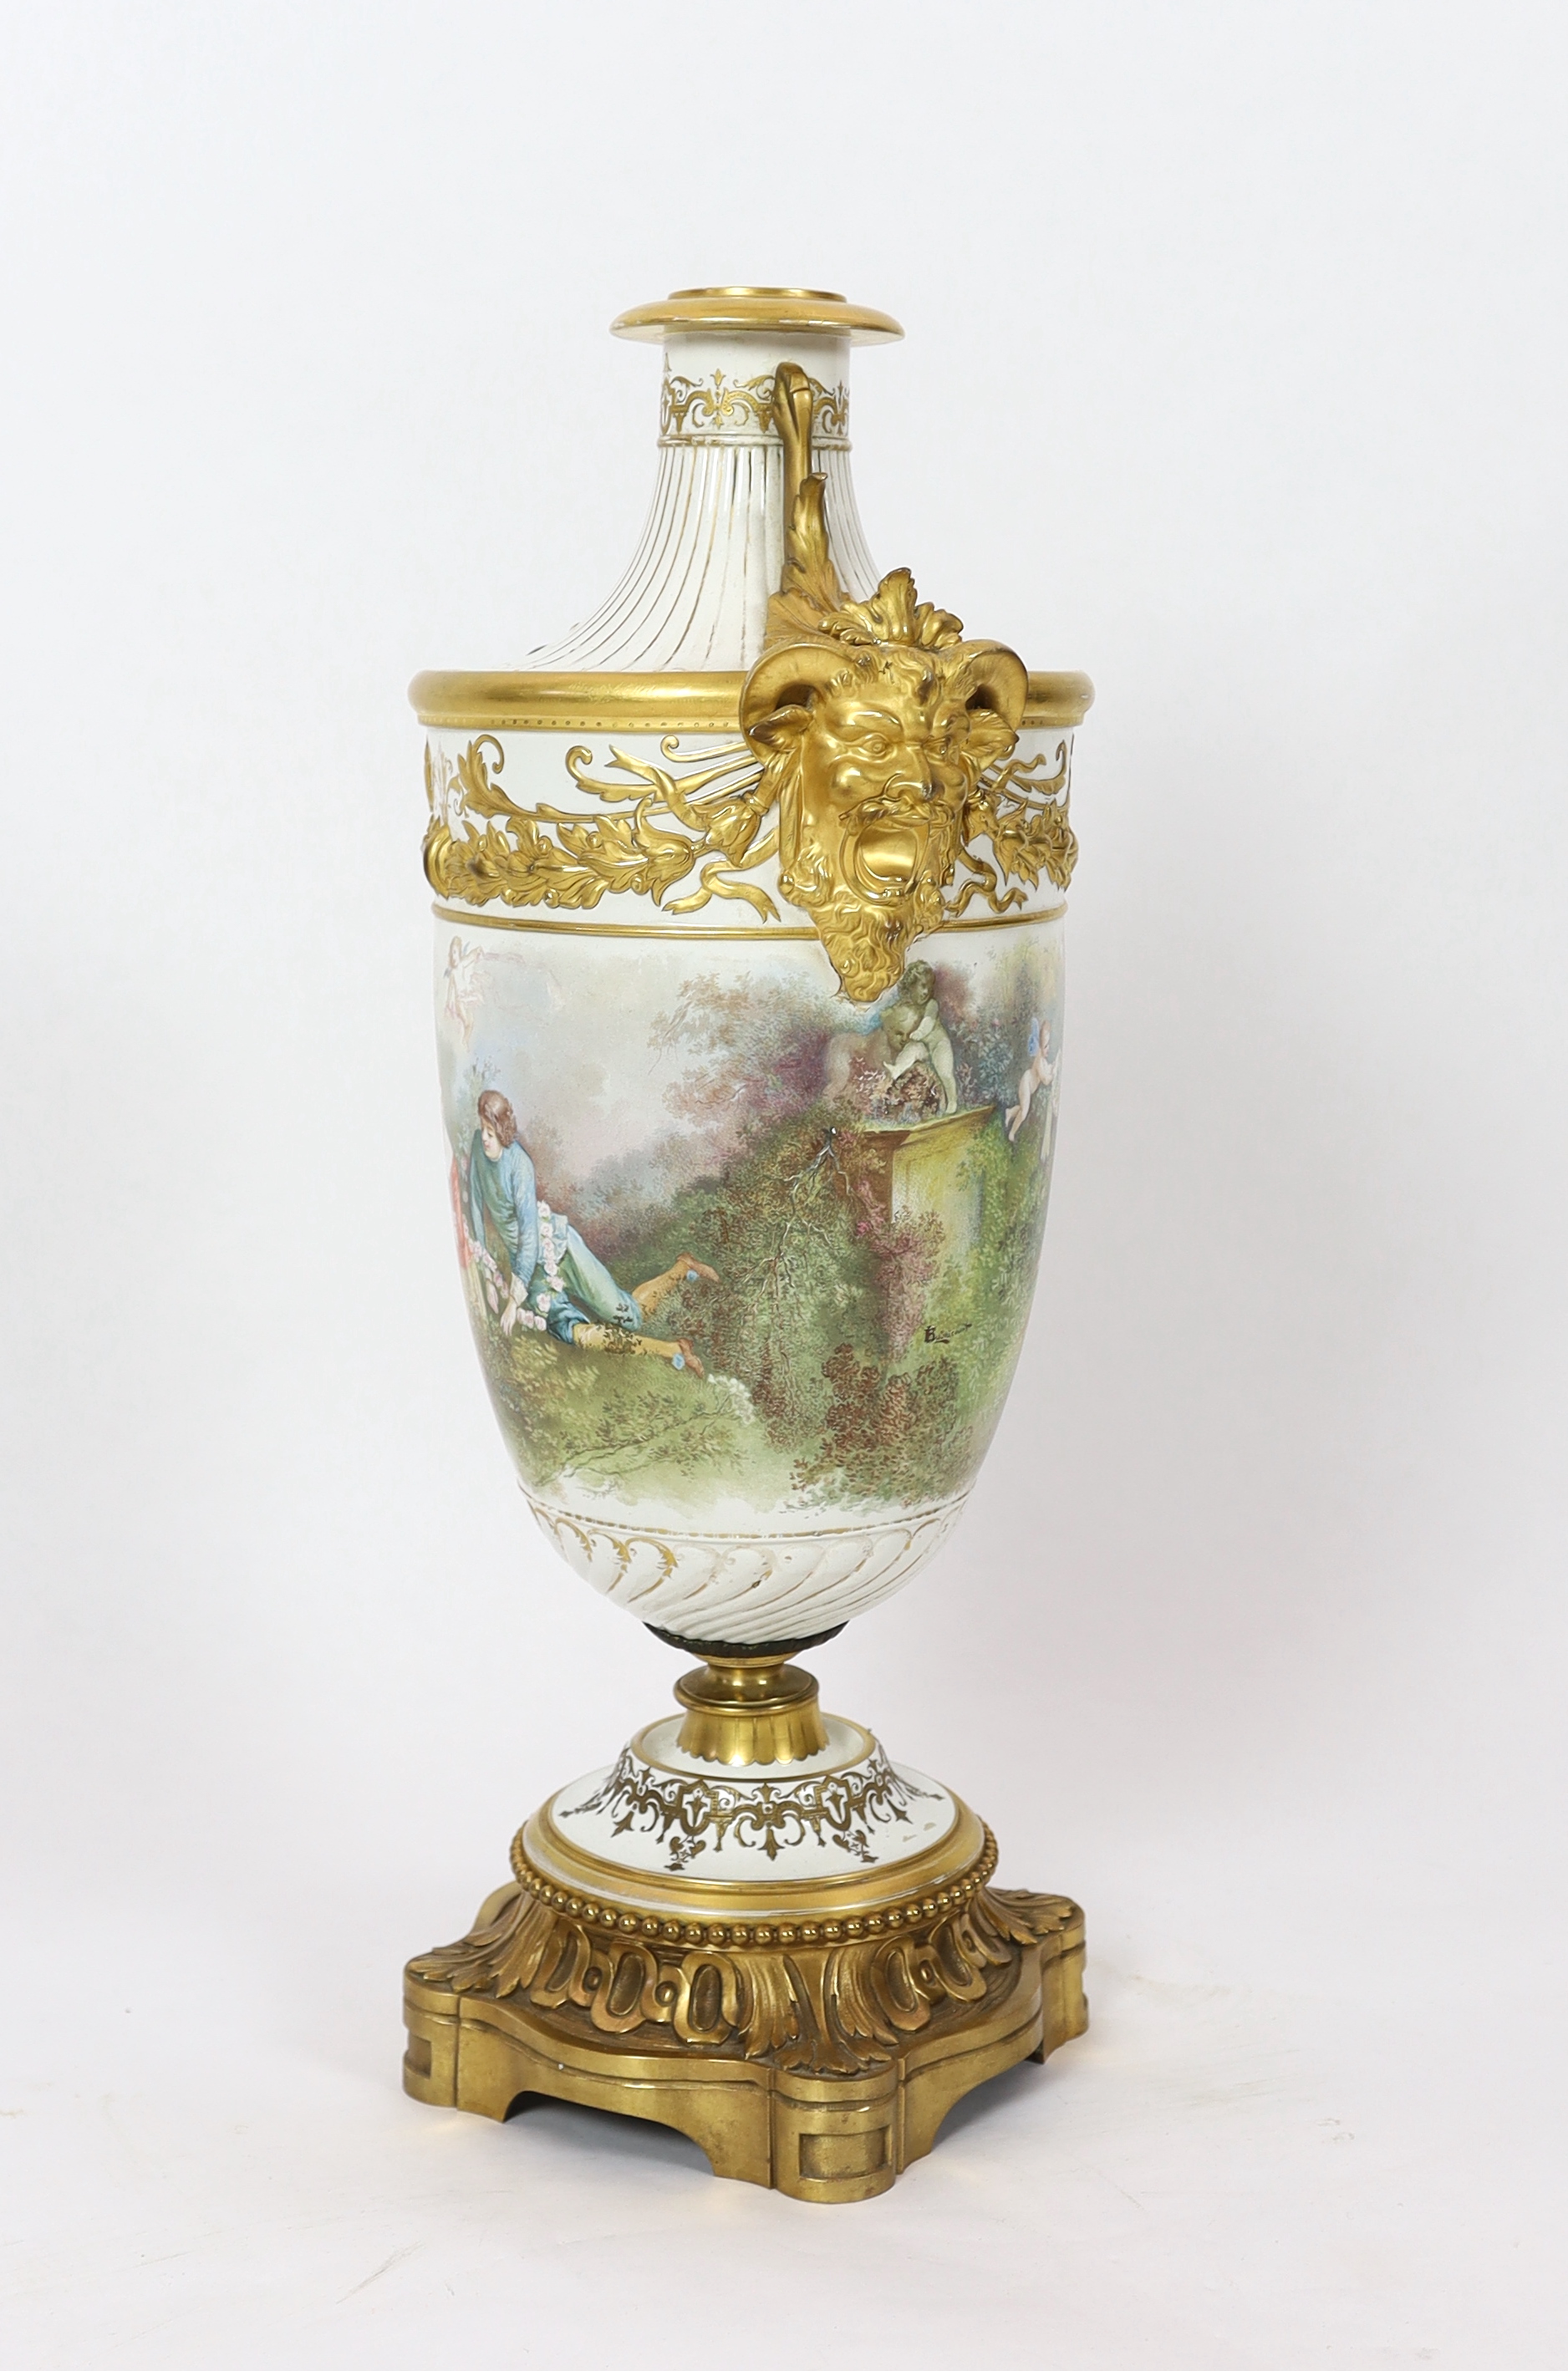 A large French porcelain and ormolu mounted vase, late 19th century, wear to gilding